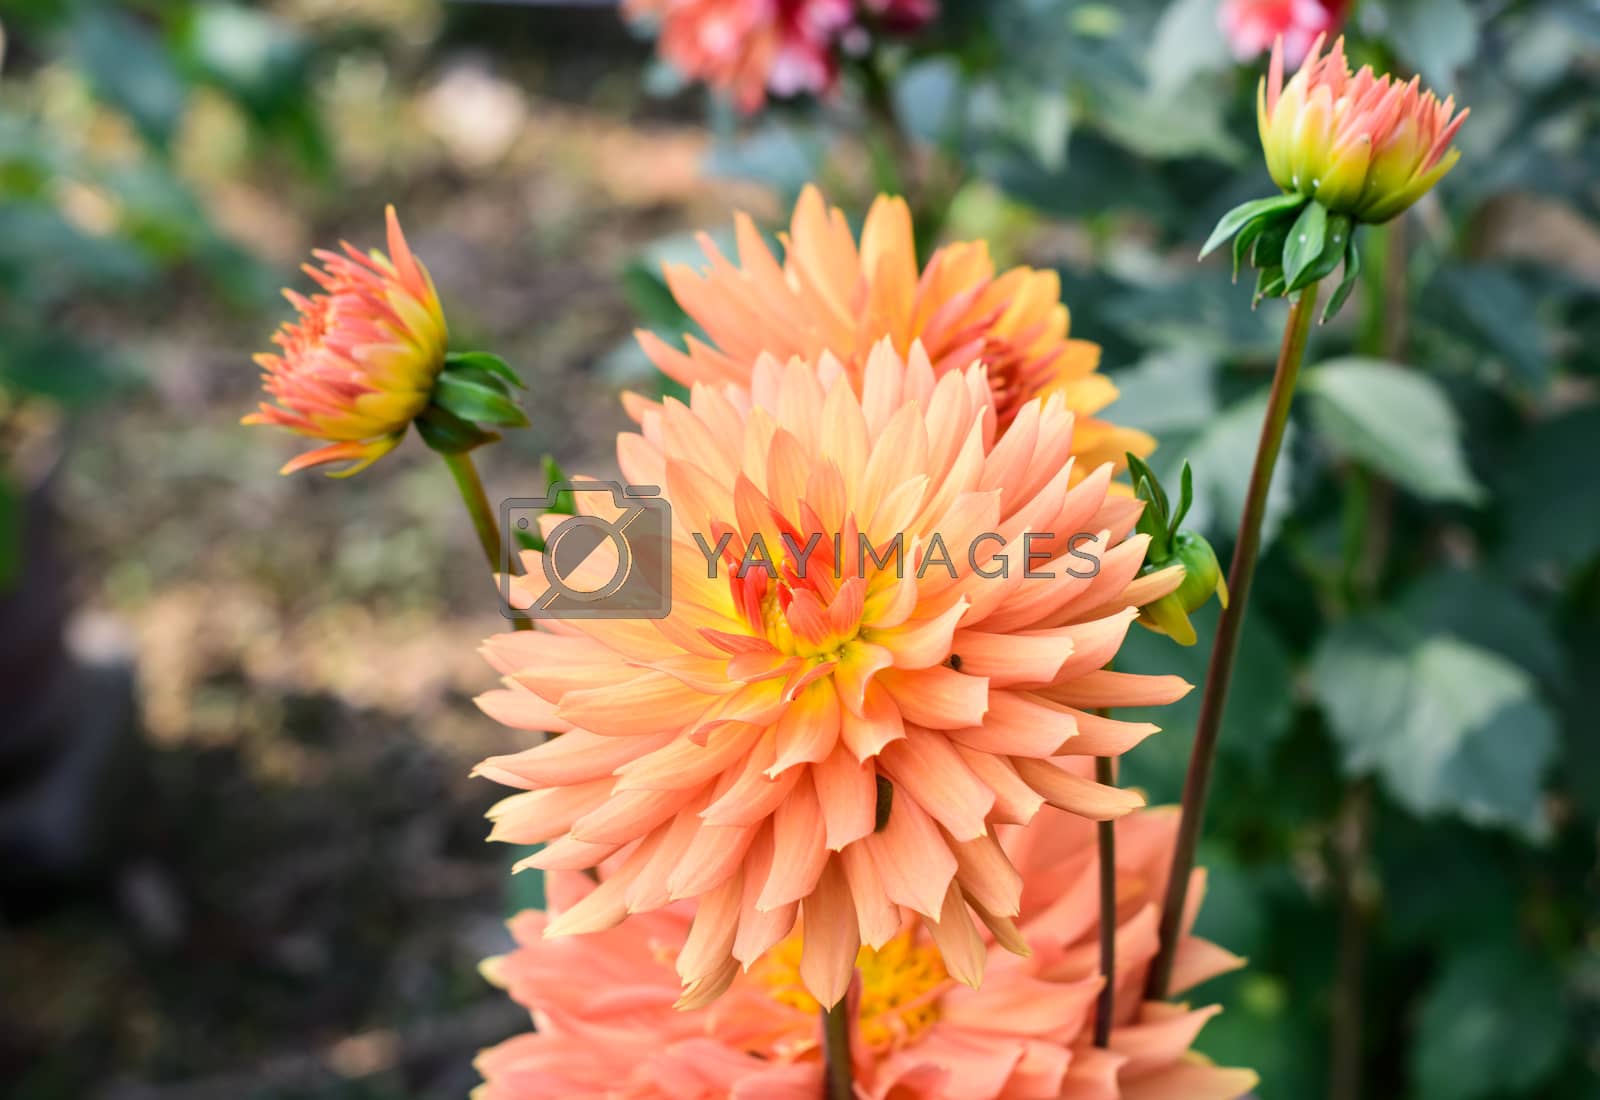 Royalty free image of Zinnia - Multi layer orange petal flower plant, a genus of sunflower tribe daisy family. A sun loving plant Blooms in winter spring and summer. Popular for bouquets. Copy space room for text. by sudiptabhowmick